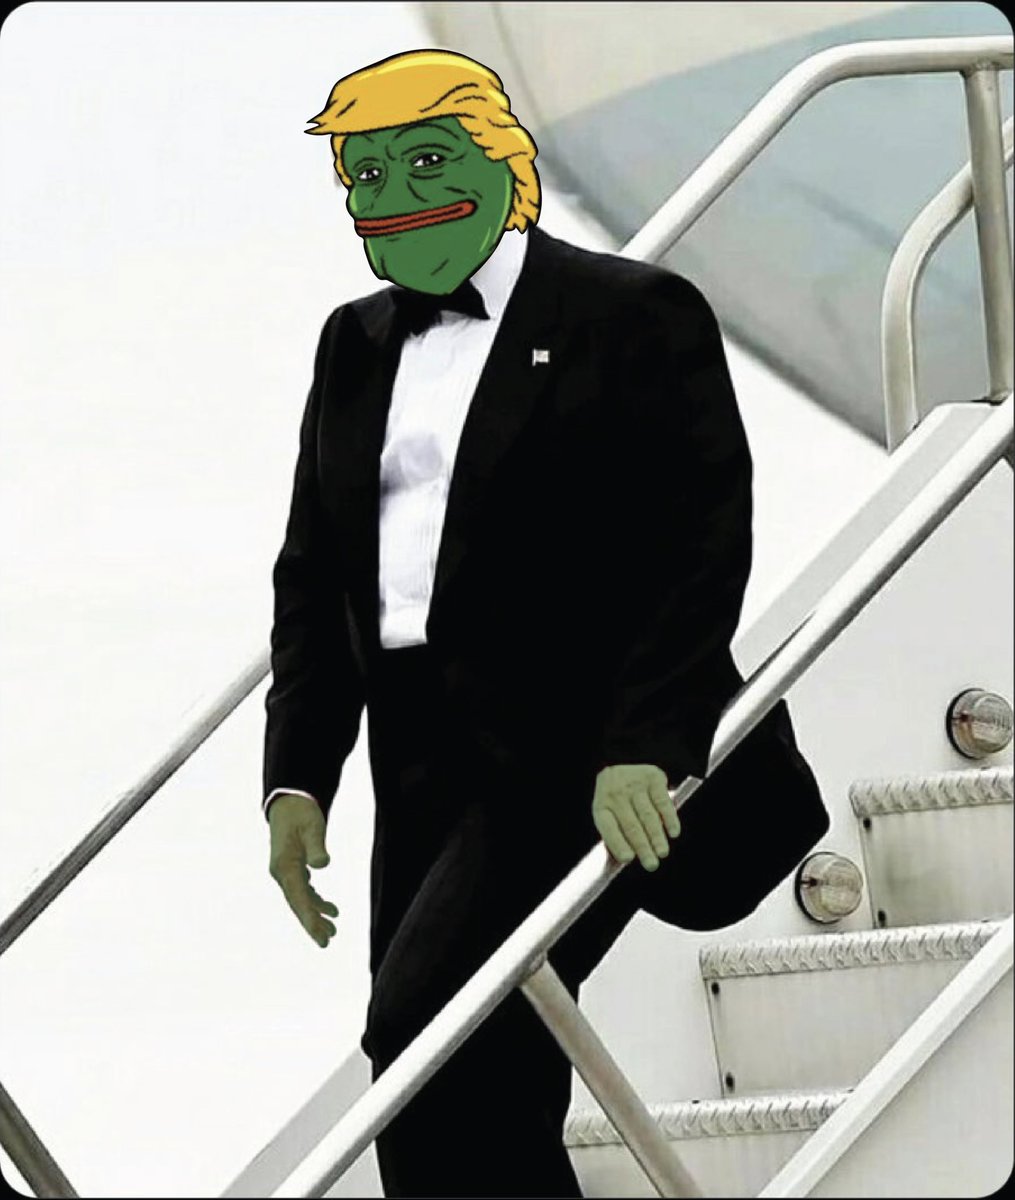 Do you believe Pepe Trump will make America Great Again?? A. Yes B. Yes C. Yes